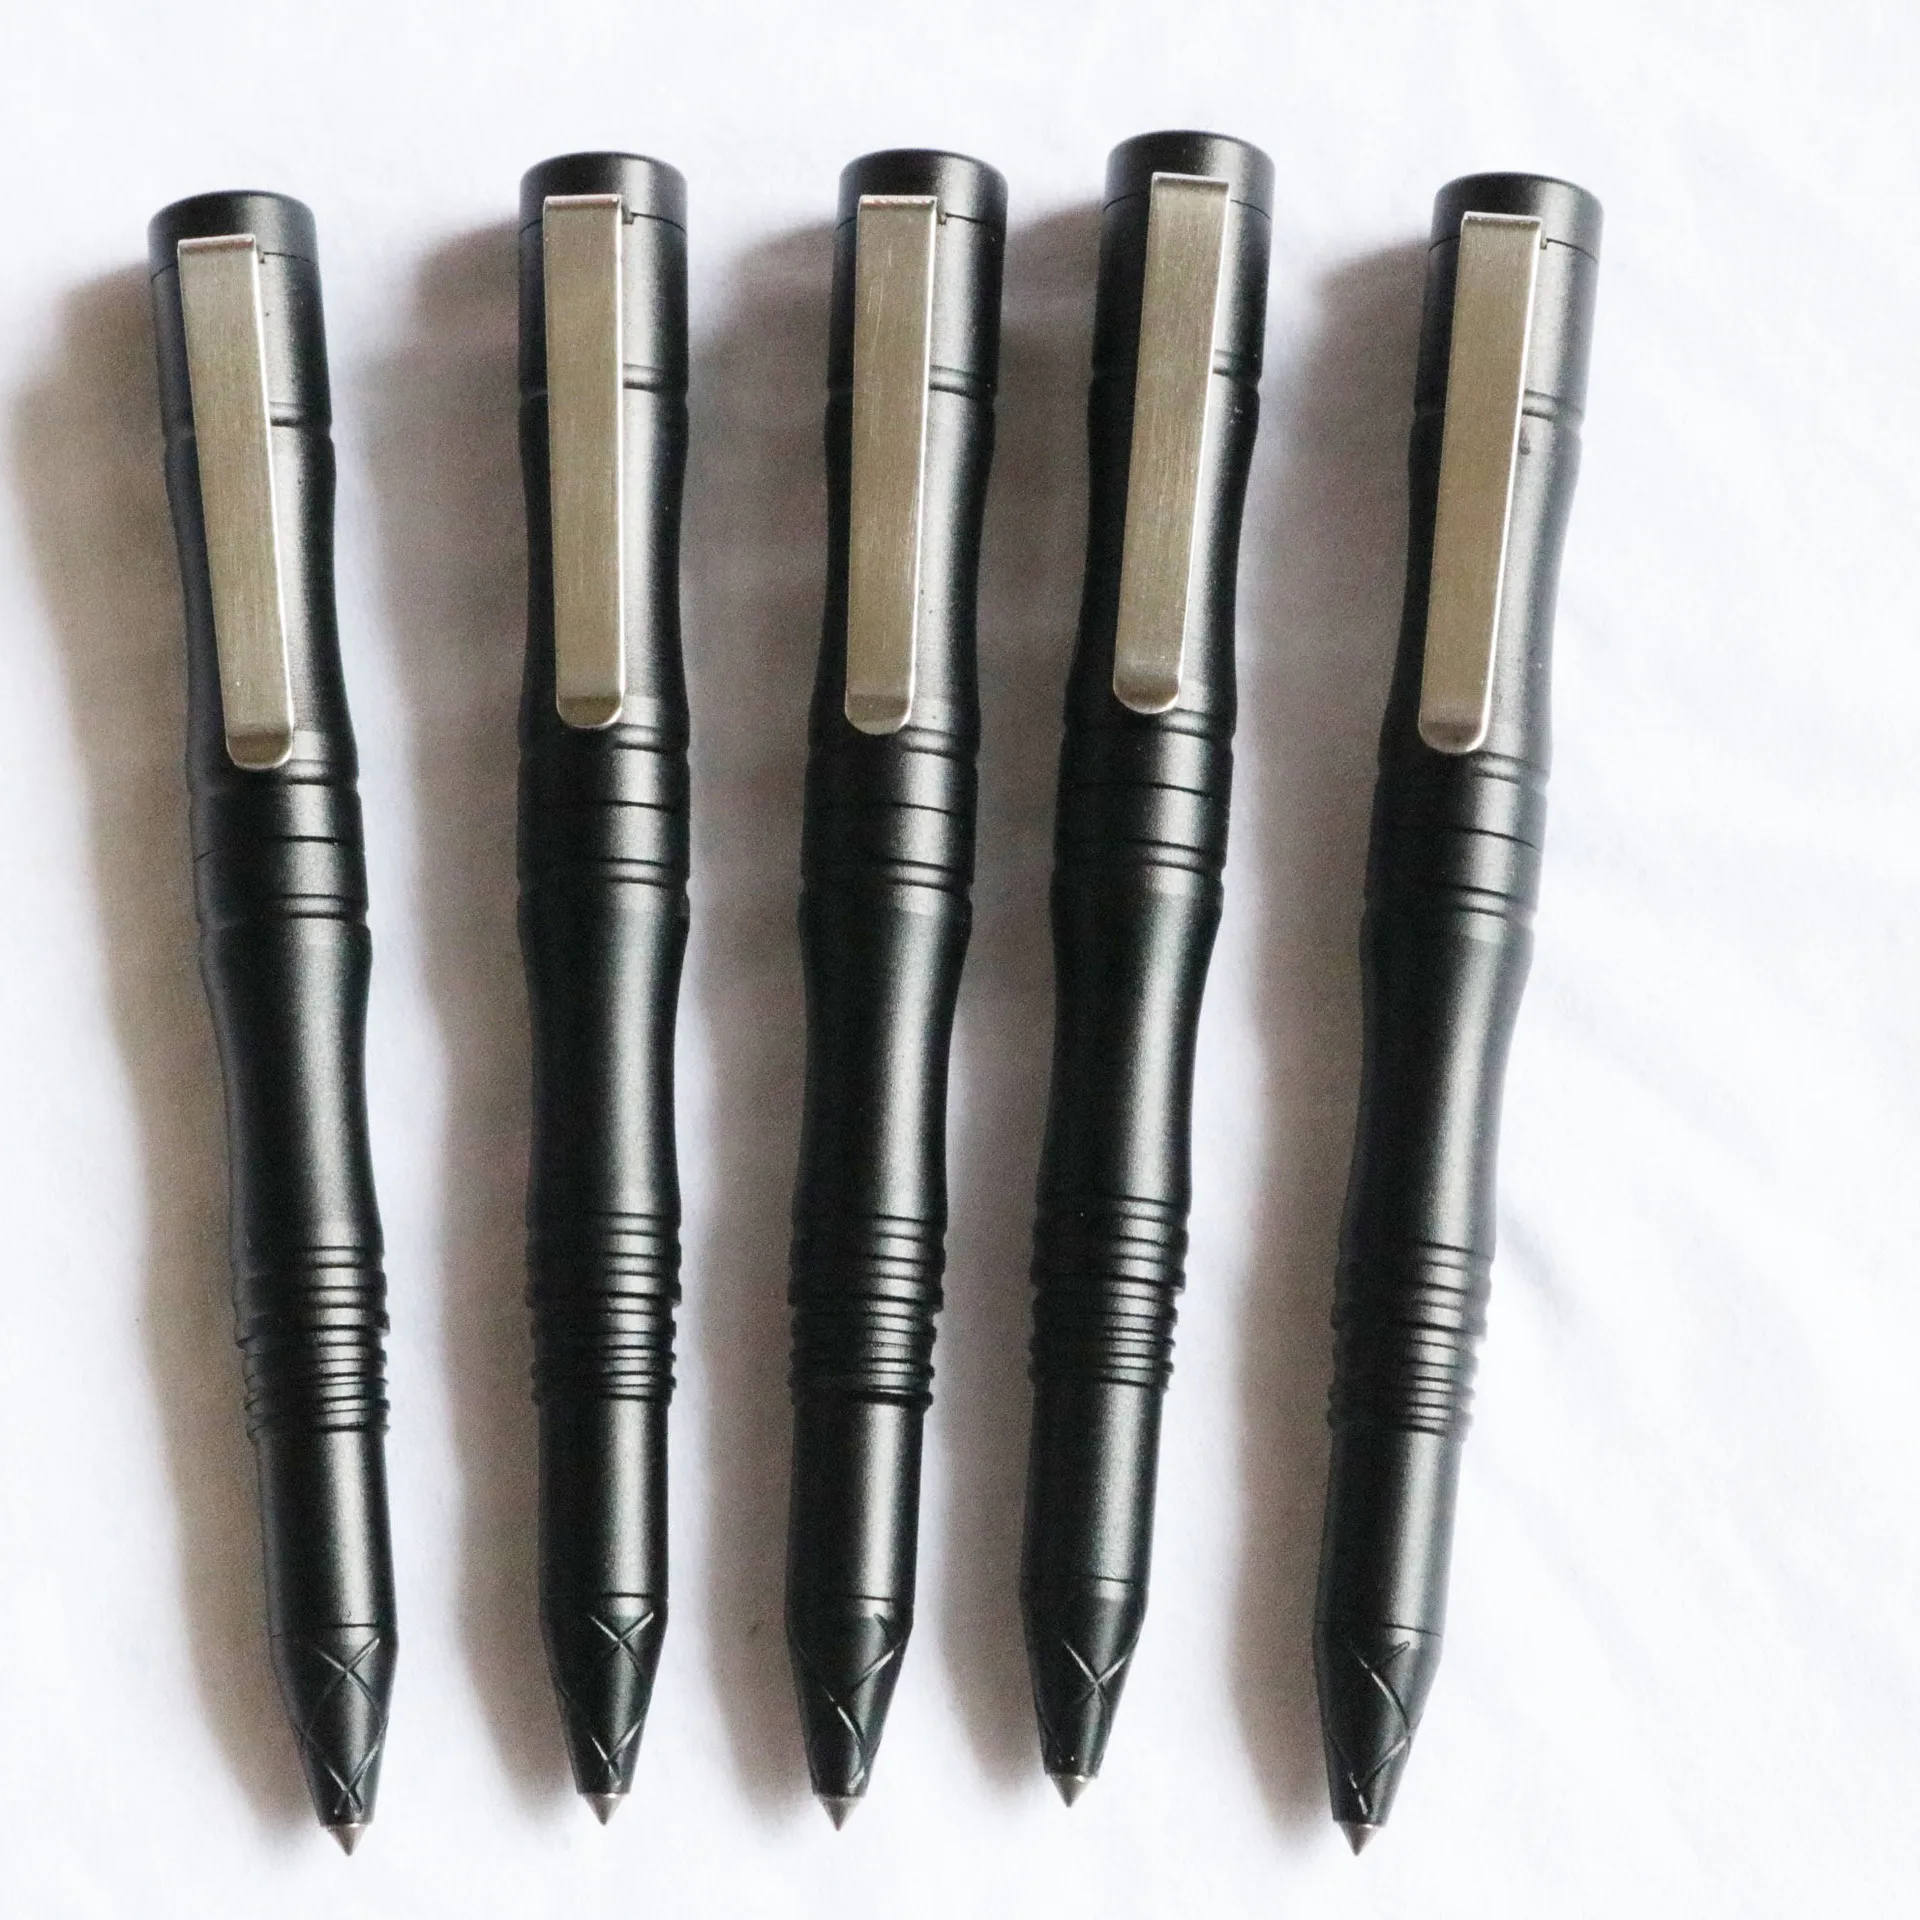 D/Silver/1 Pack Tungsten Steel Tactical Pen for Glass Breaker and Self-defense Mutifunctional Emergent Tool 